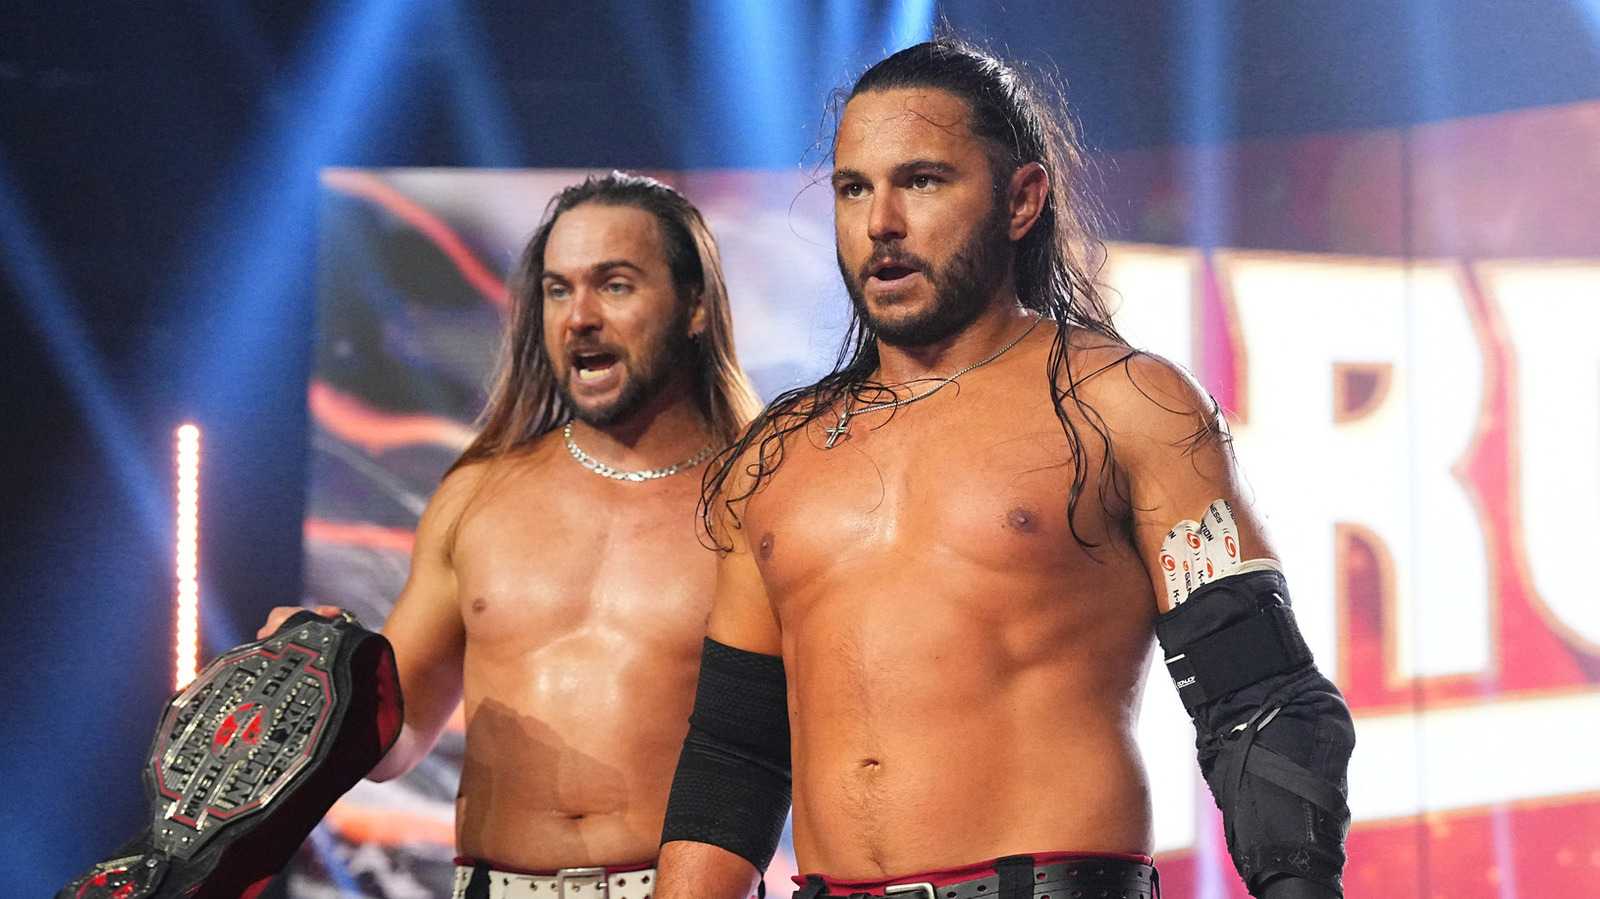 Matt Jackson Comments On His Wife's Departure From AEW